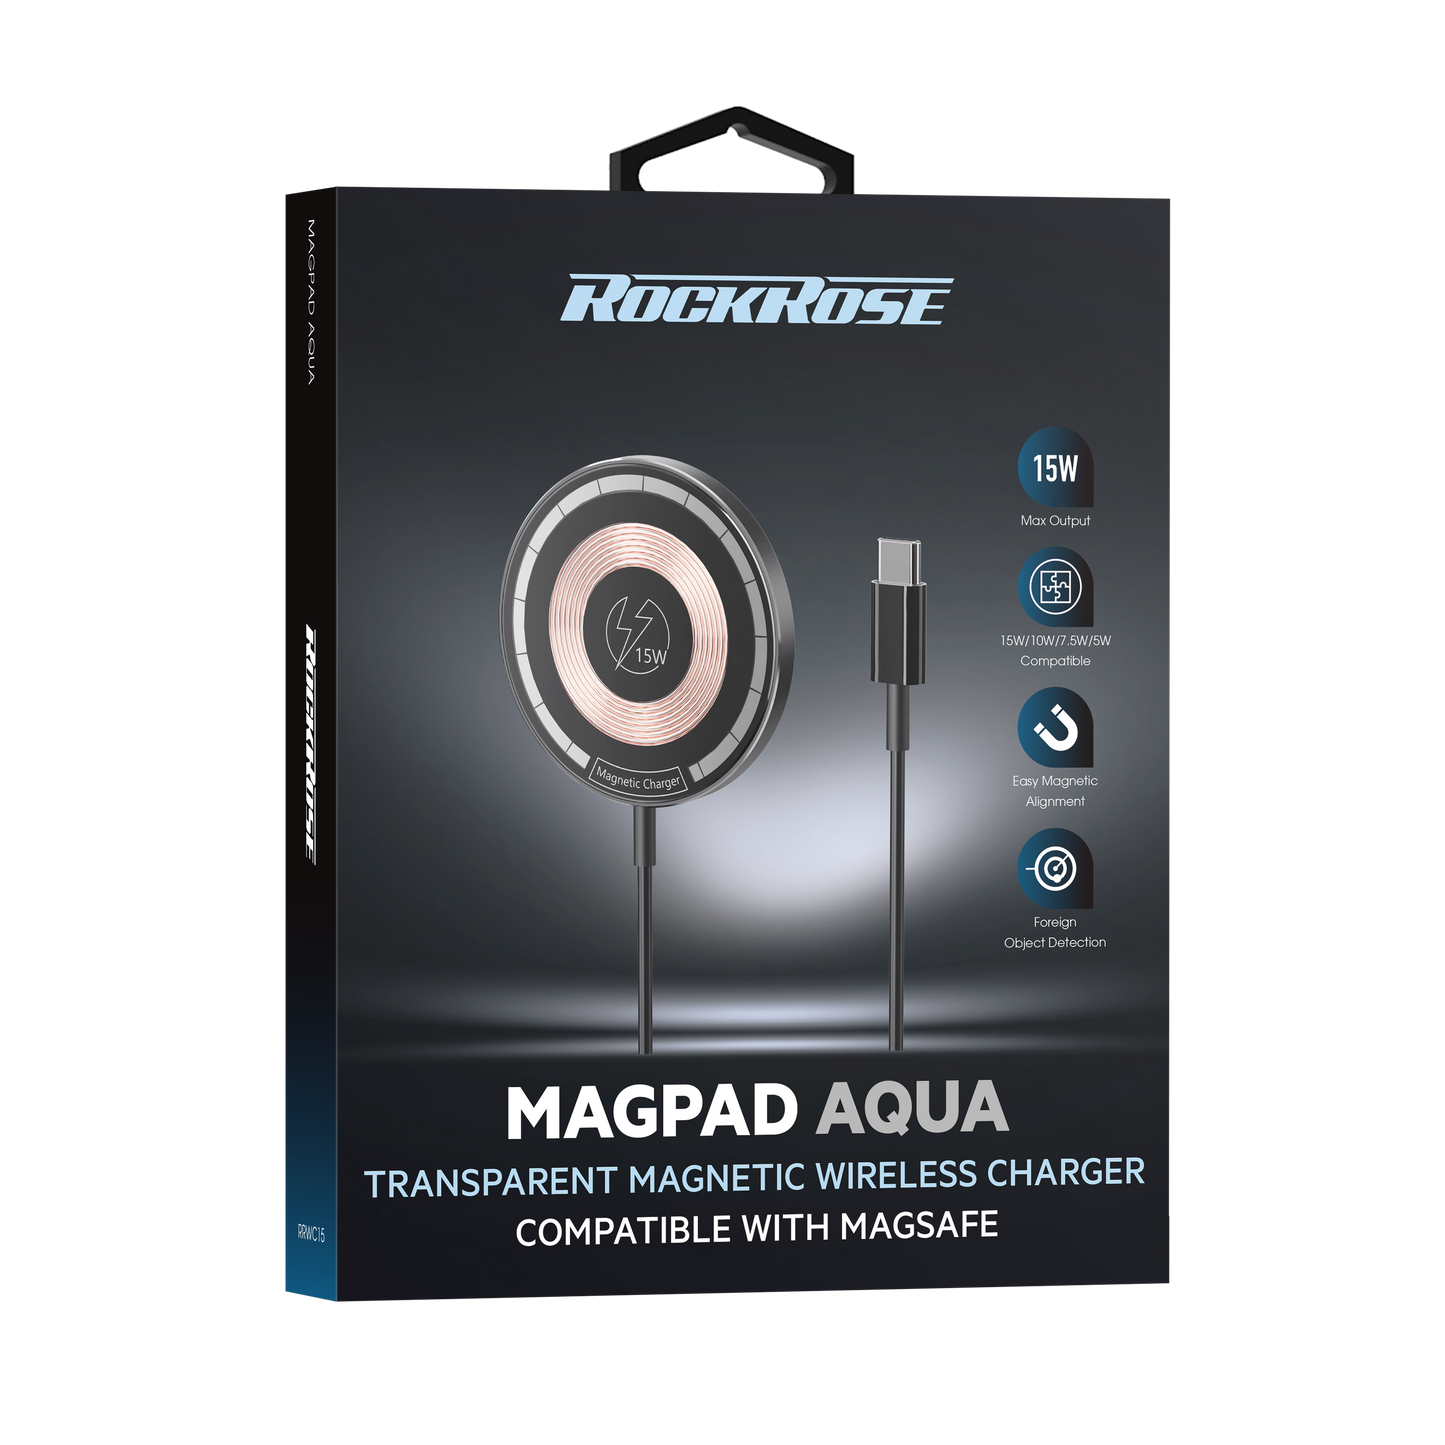 Rockrose MagPad Aqua 15W Transparent Magnetic Wireless Charger Compatible with MagSafe